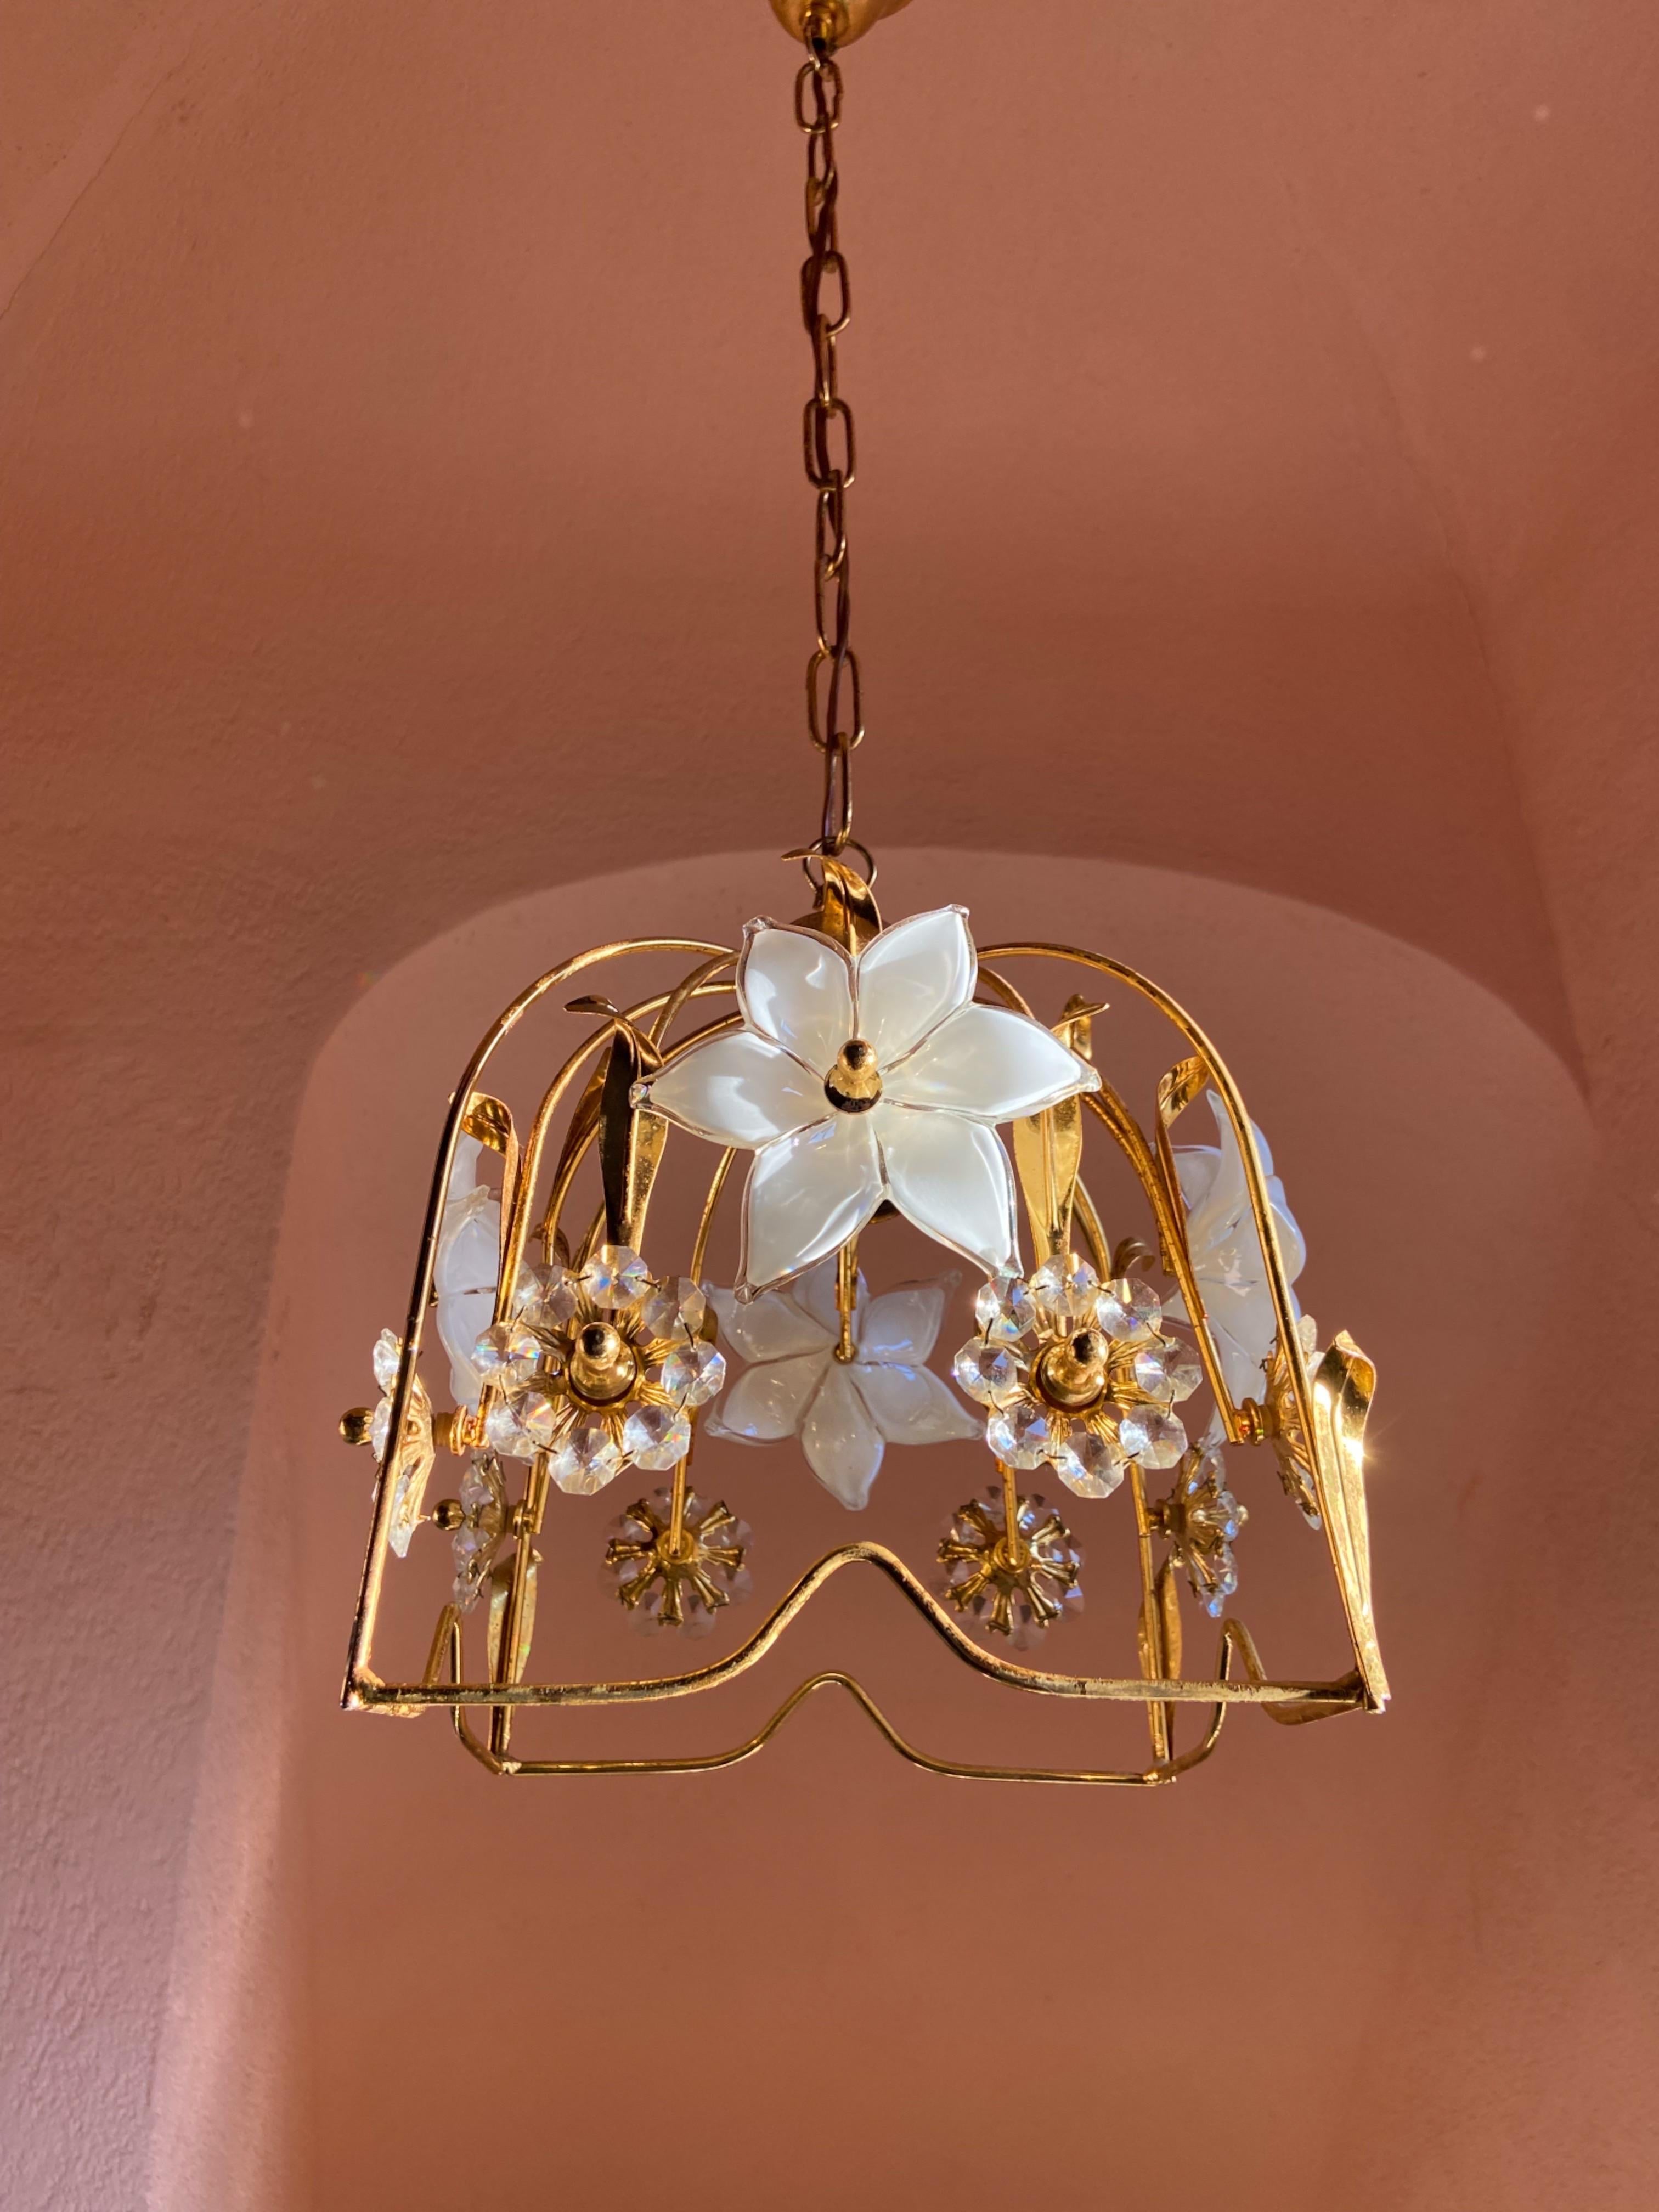 Italian Brass Chandelier with Murano Glass Flowers and Crystals In Good Condition For Sale In Palermo, PA